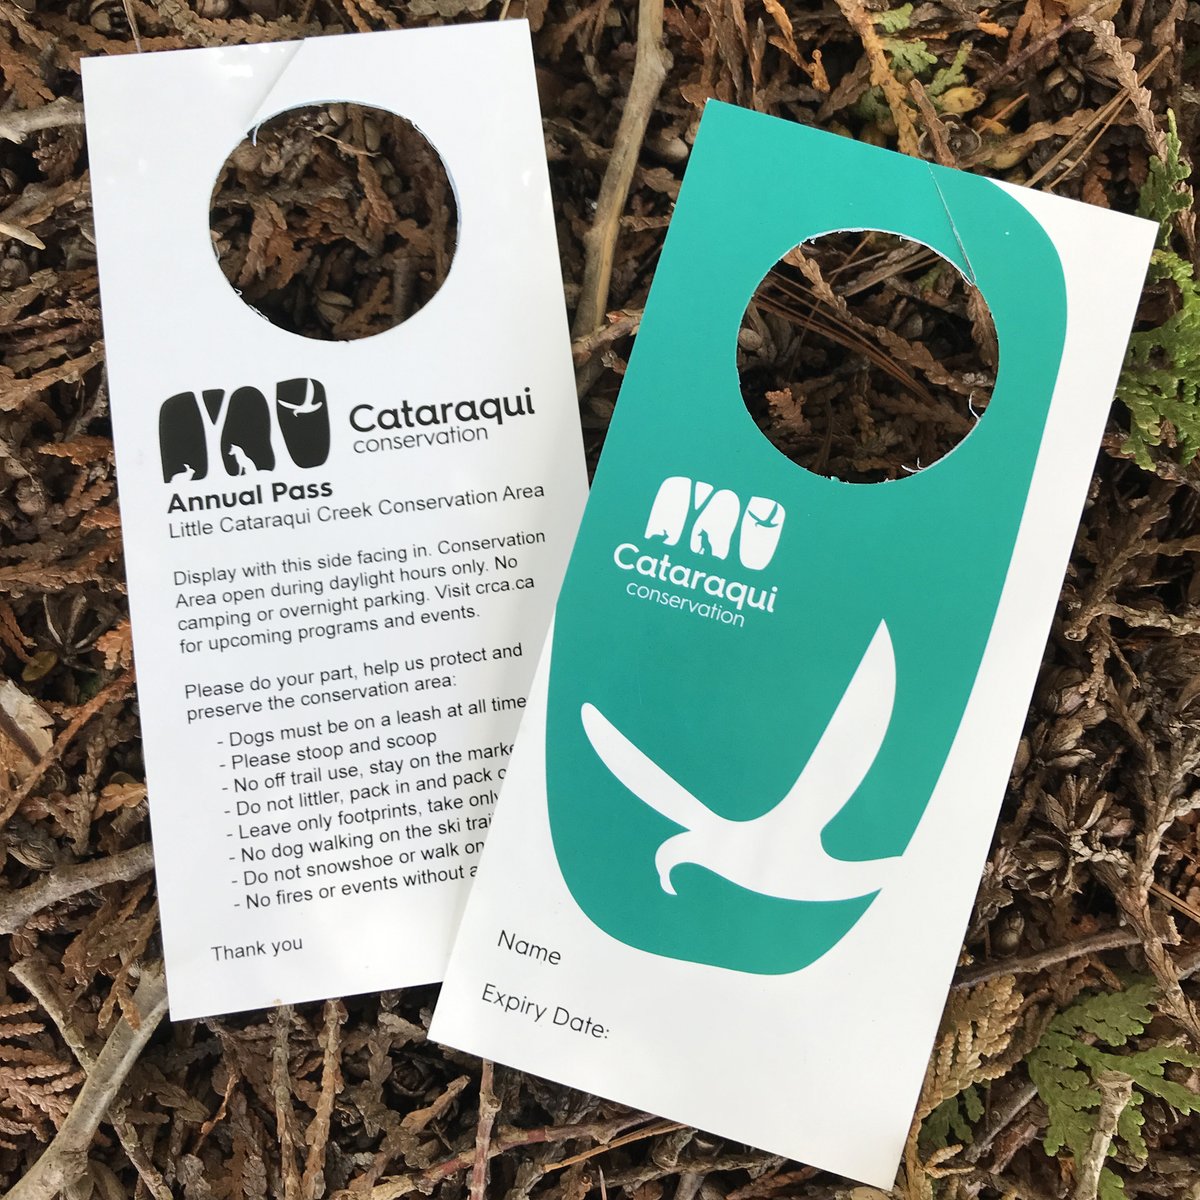 An annual pass provides you with entry to Little Cataraqui Creek Conservation Area in Kingston for one year. Total cost, including taxes, is $85. cataraquiconservation.ca/products/annua…